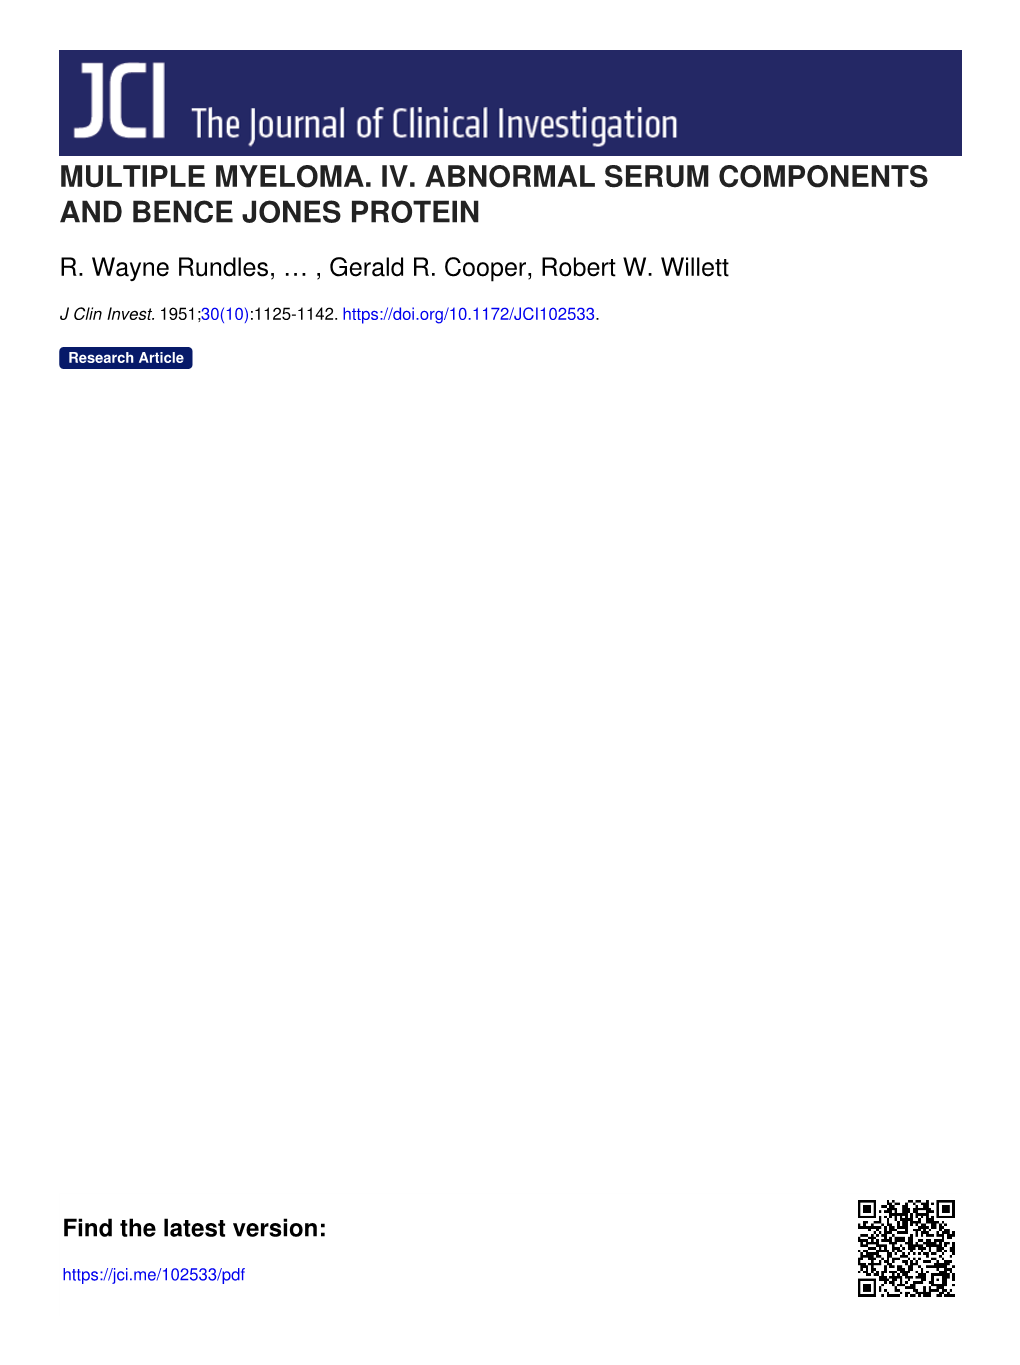 Multiple Myeloma. Iv. Abnormal Serum Components and Bence Jones Protein